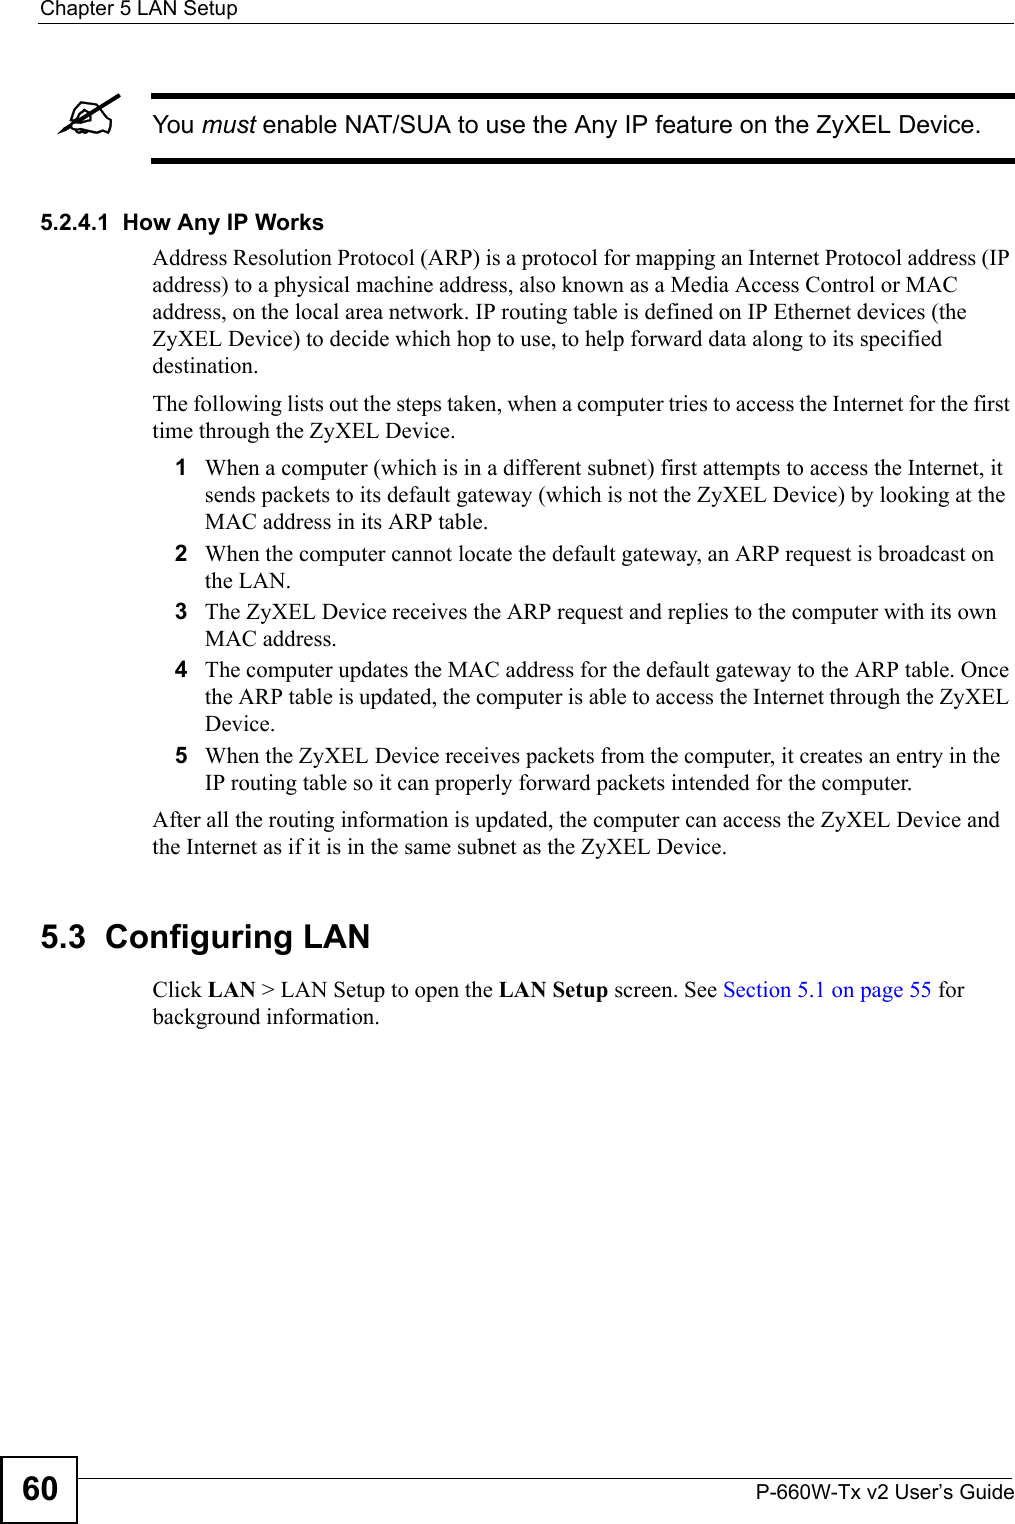 Chapter 5 LAN SetupP-660W-Tx v2 User’s Guide60&quot;You must enable NAT/SUA to use the Any IP feature on the ZyXEL Device. 5.2.4.1  How Any IP WorksAddress Resolution Protocol (ARP) is a protocol for mapping an Internet Protocol address (IP address) to a physical machine address, also known as a Media Access Control or MAC address, on the local area network. IP routing table is defined on IP Ethernet devices (the ZyXEL Device) to decide which hop to use, to help forward data along to its specified destination.The following lists out the steps taken, when a computer tries to access the Internet for the first time through the ZyXEL Device.1When a computer (which is in a different subnet) first attempts to access the Internet, it sends packets to its default gateway (which is not the ZyXEL Device) by looking at the MAC address in its ARP table. 2When the computer cannot locate the default gateway, an ARP request is broadcast on the LAN. 3The ZyXEL Device receives the ARP request and replies to the computer with its own MAC address. 4The computer updates the MAC address for the default gateway to the ARP table. Once the ARP table is updated, the computer is able to access the Internet through the ZyXEL Device. 5When the ZyXEL Device receives packets from the computer, it creates an entry in the IP routing table so it can properly forward packets intended for the computer. After all the routing information is updated, the computer can access the ZyXEL Device and the Internet as if it is in the same subnet as the ZyXEL Device. 5.3  Configuring LAN Click LAN &gt; LAN Setup to open the LAN Setup screen. See Section 5.1 on page 55 for background information. 